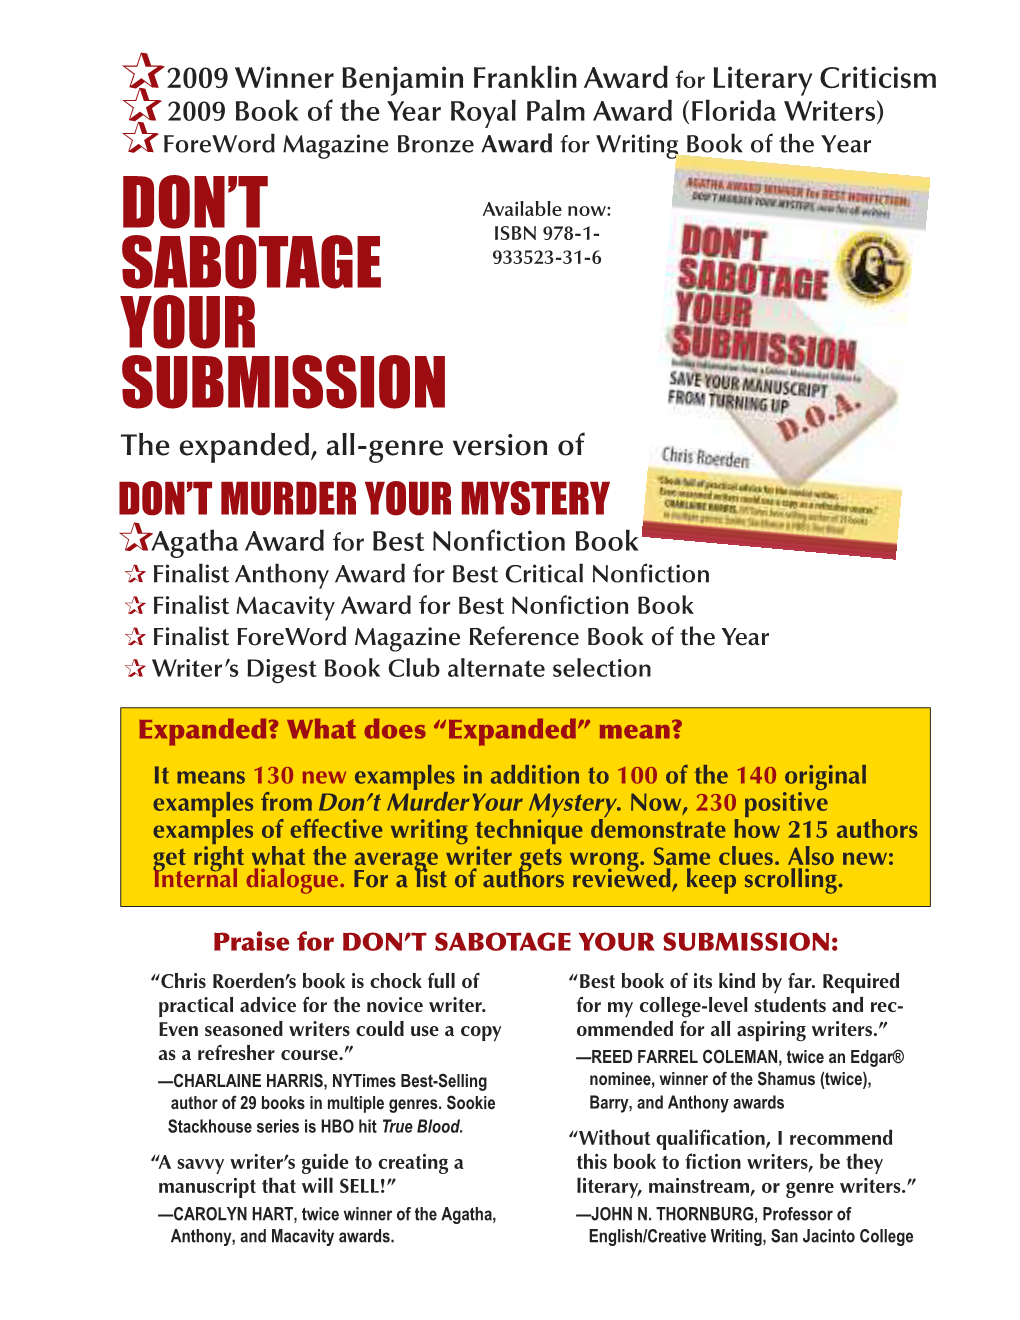 Don't Sabotage Your Submission